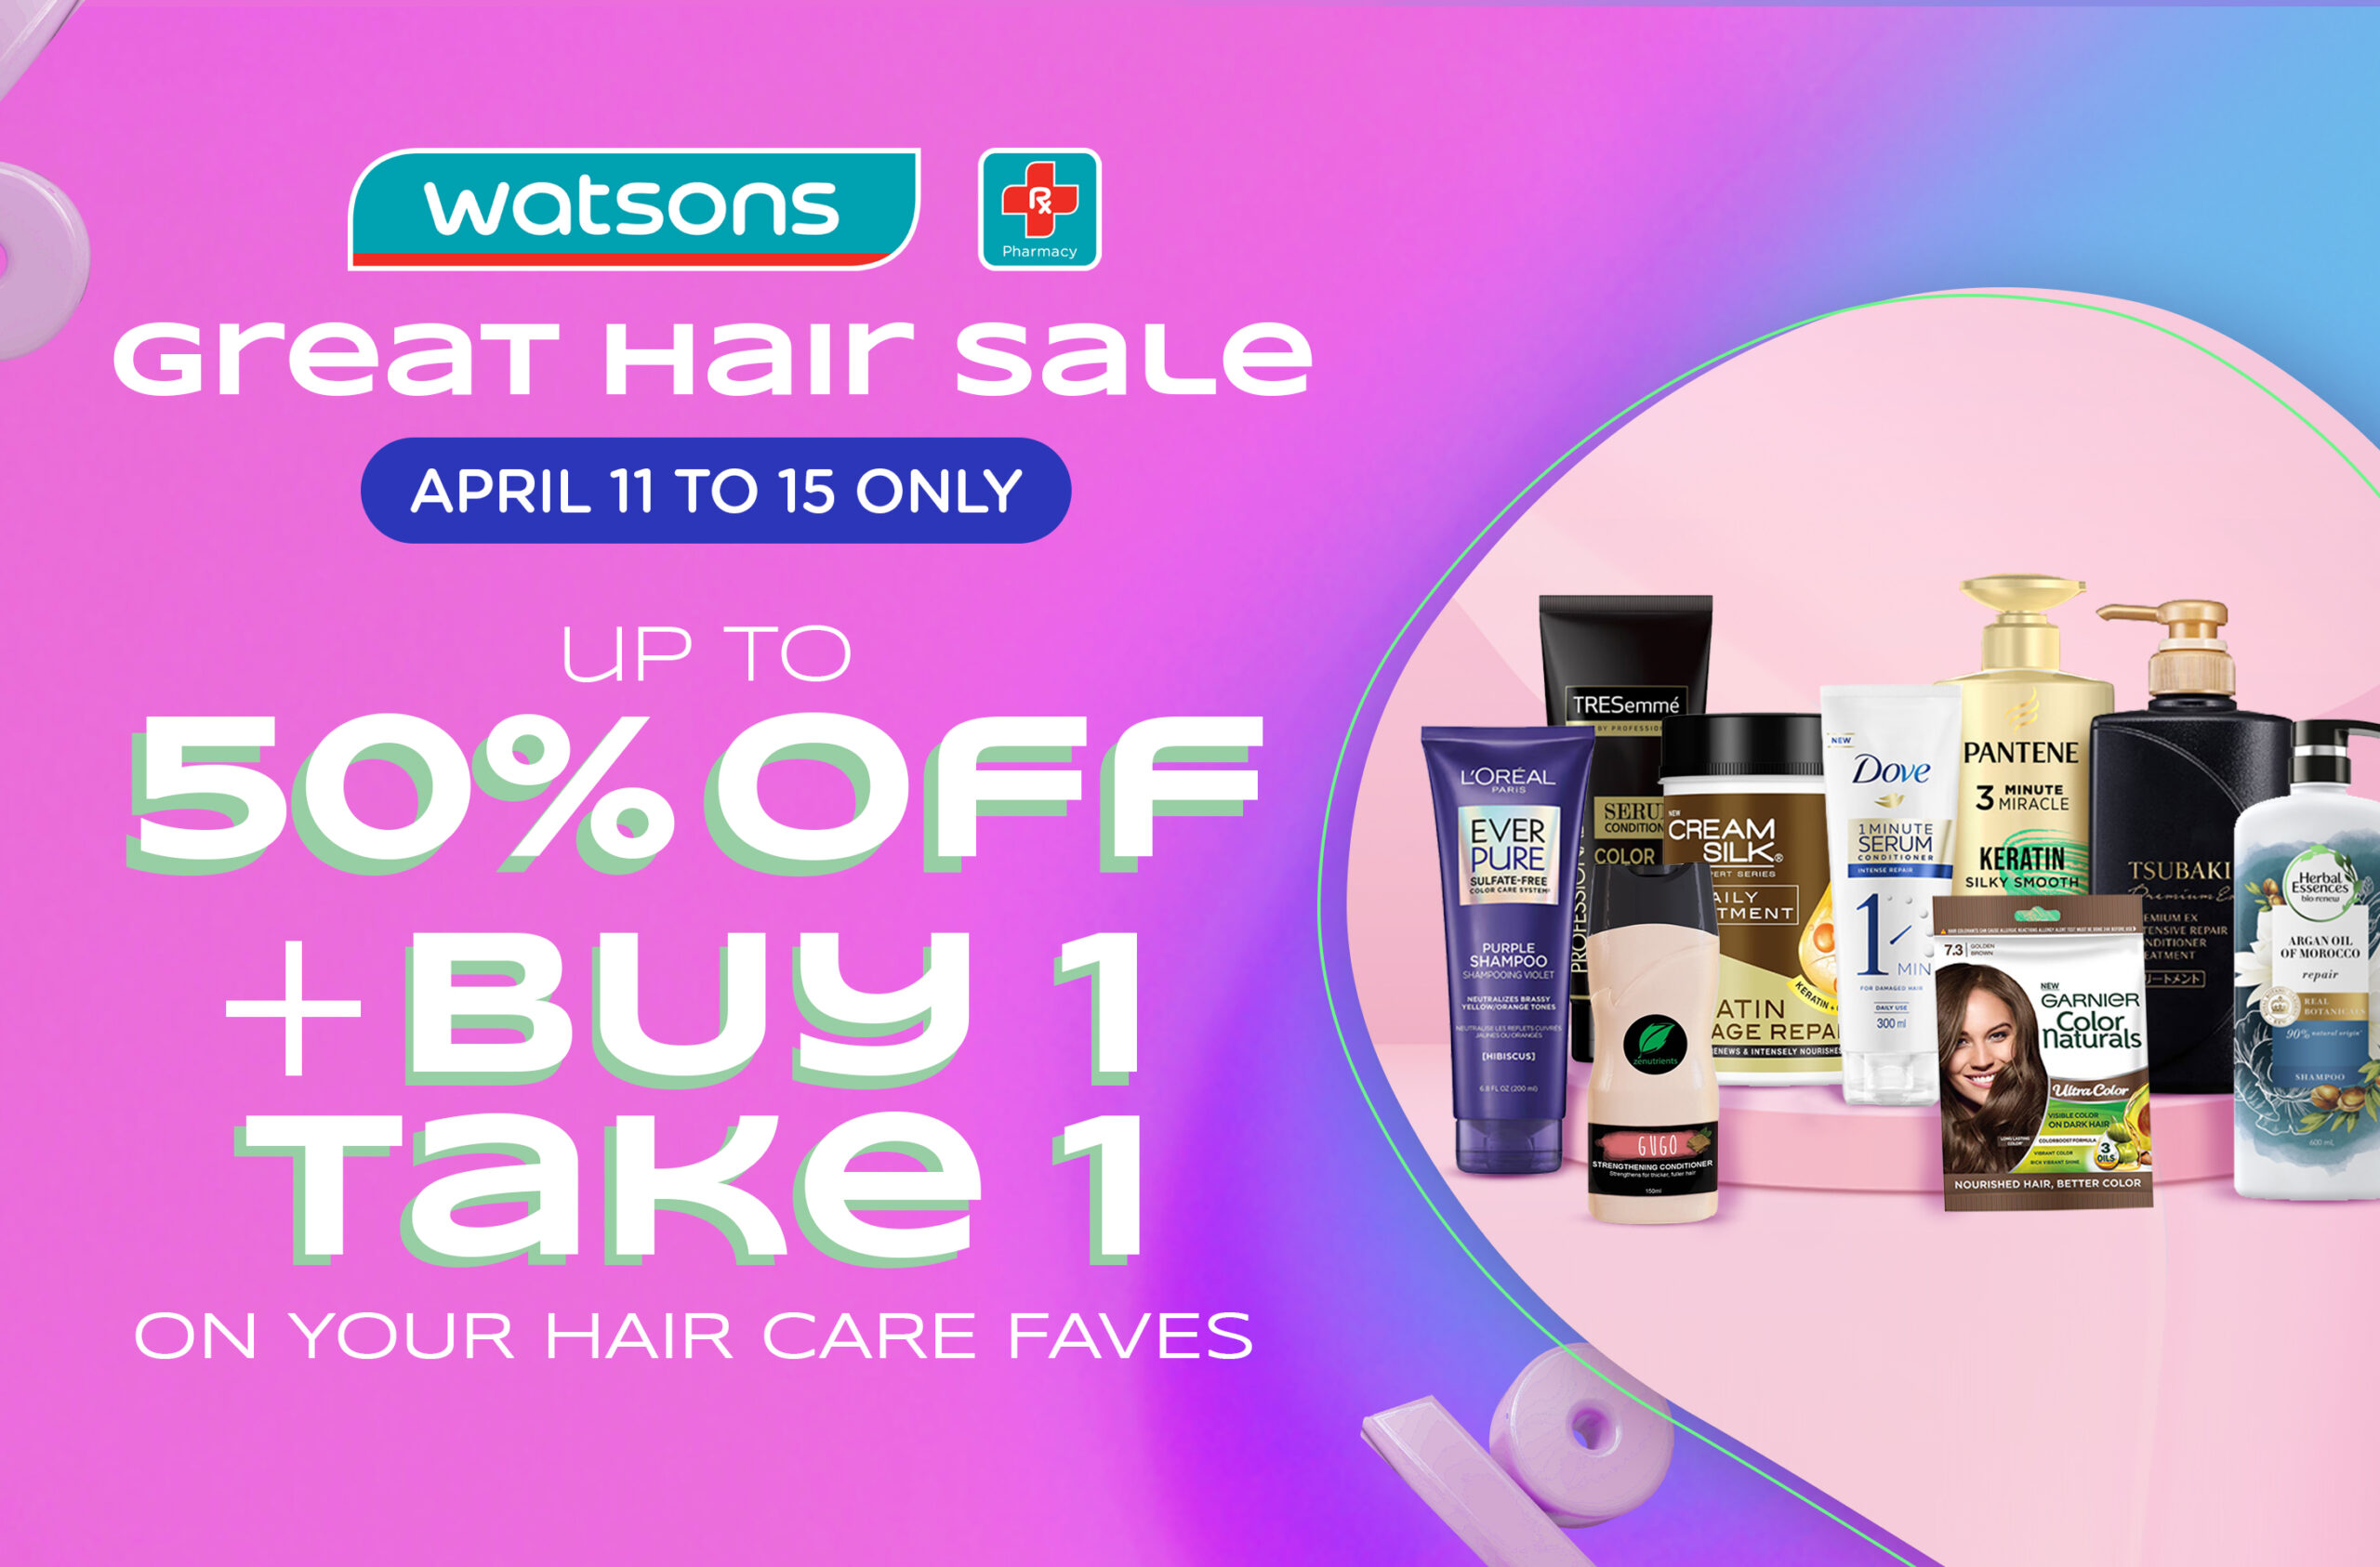 Watsons Massive Hair Sale – Up to 50% Off & Buy 1 Get 1 Free!